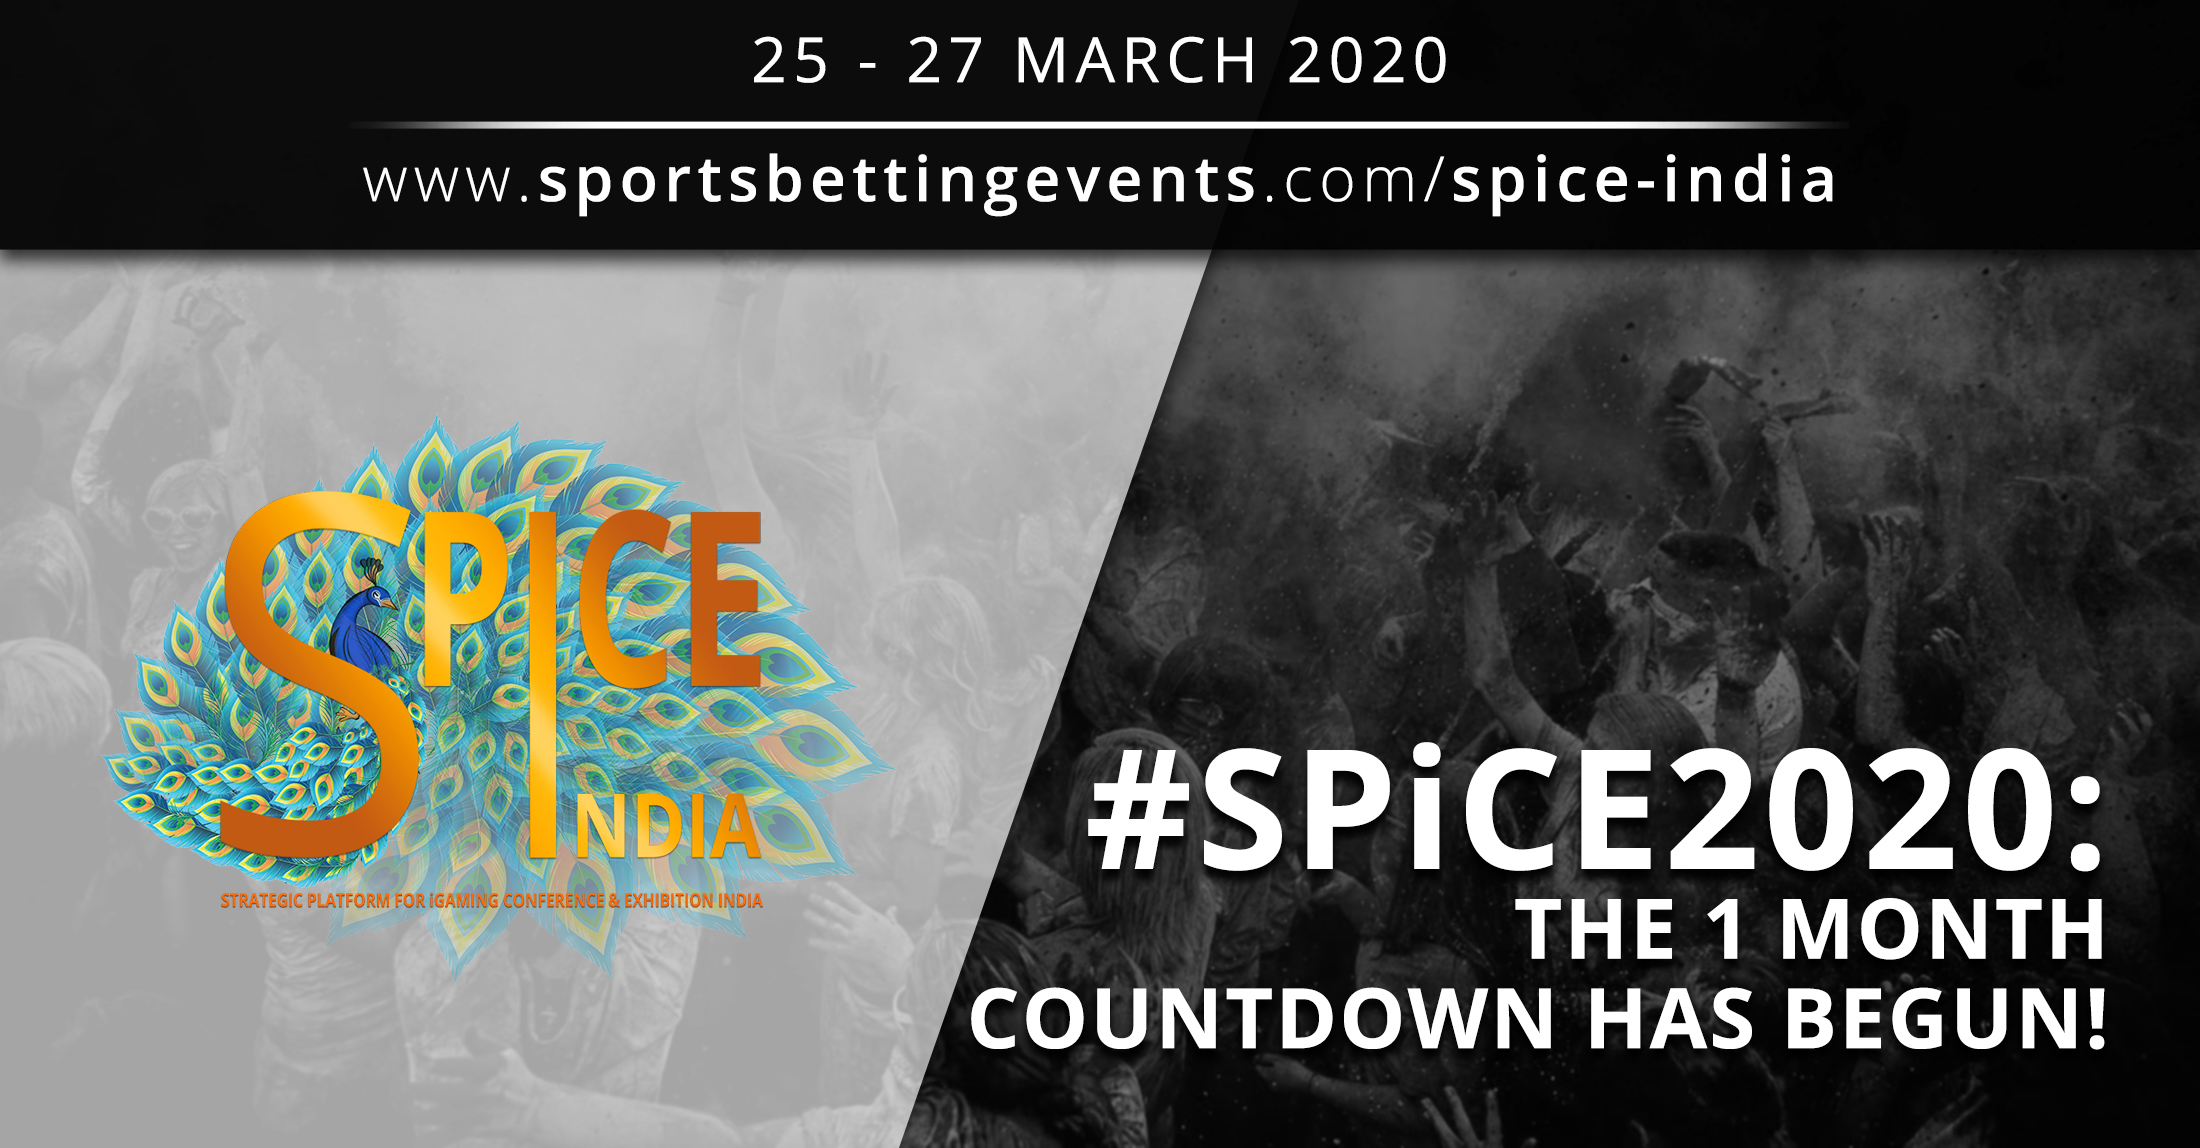 SPiCE India 2020: Gaming Event Countdown